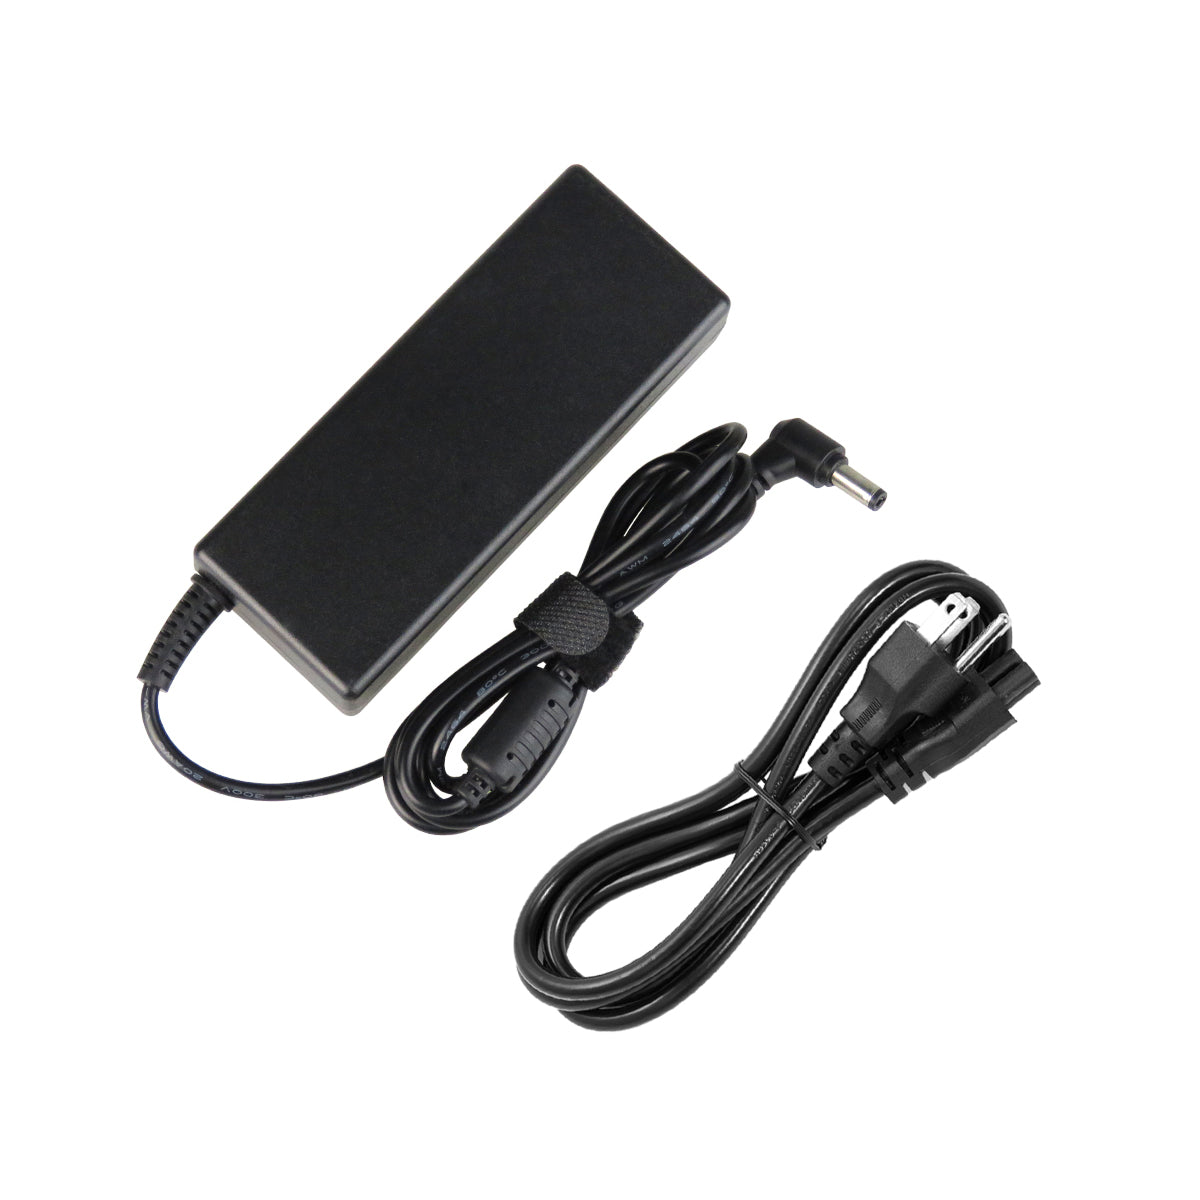 AC Adapter Charger for ASUS K53E Notebook.